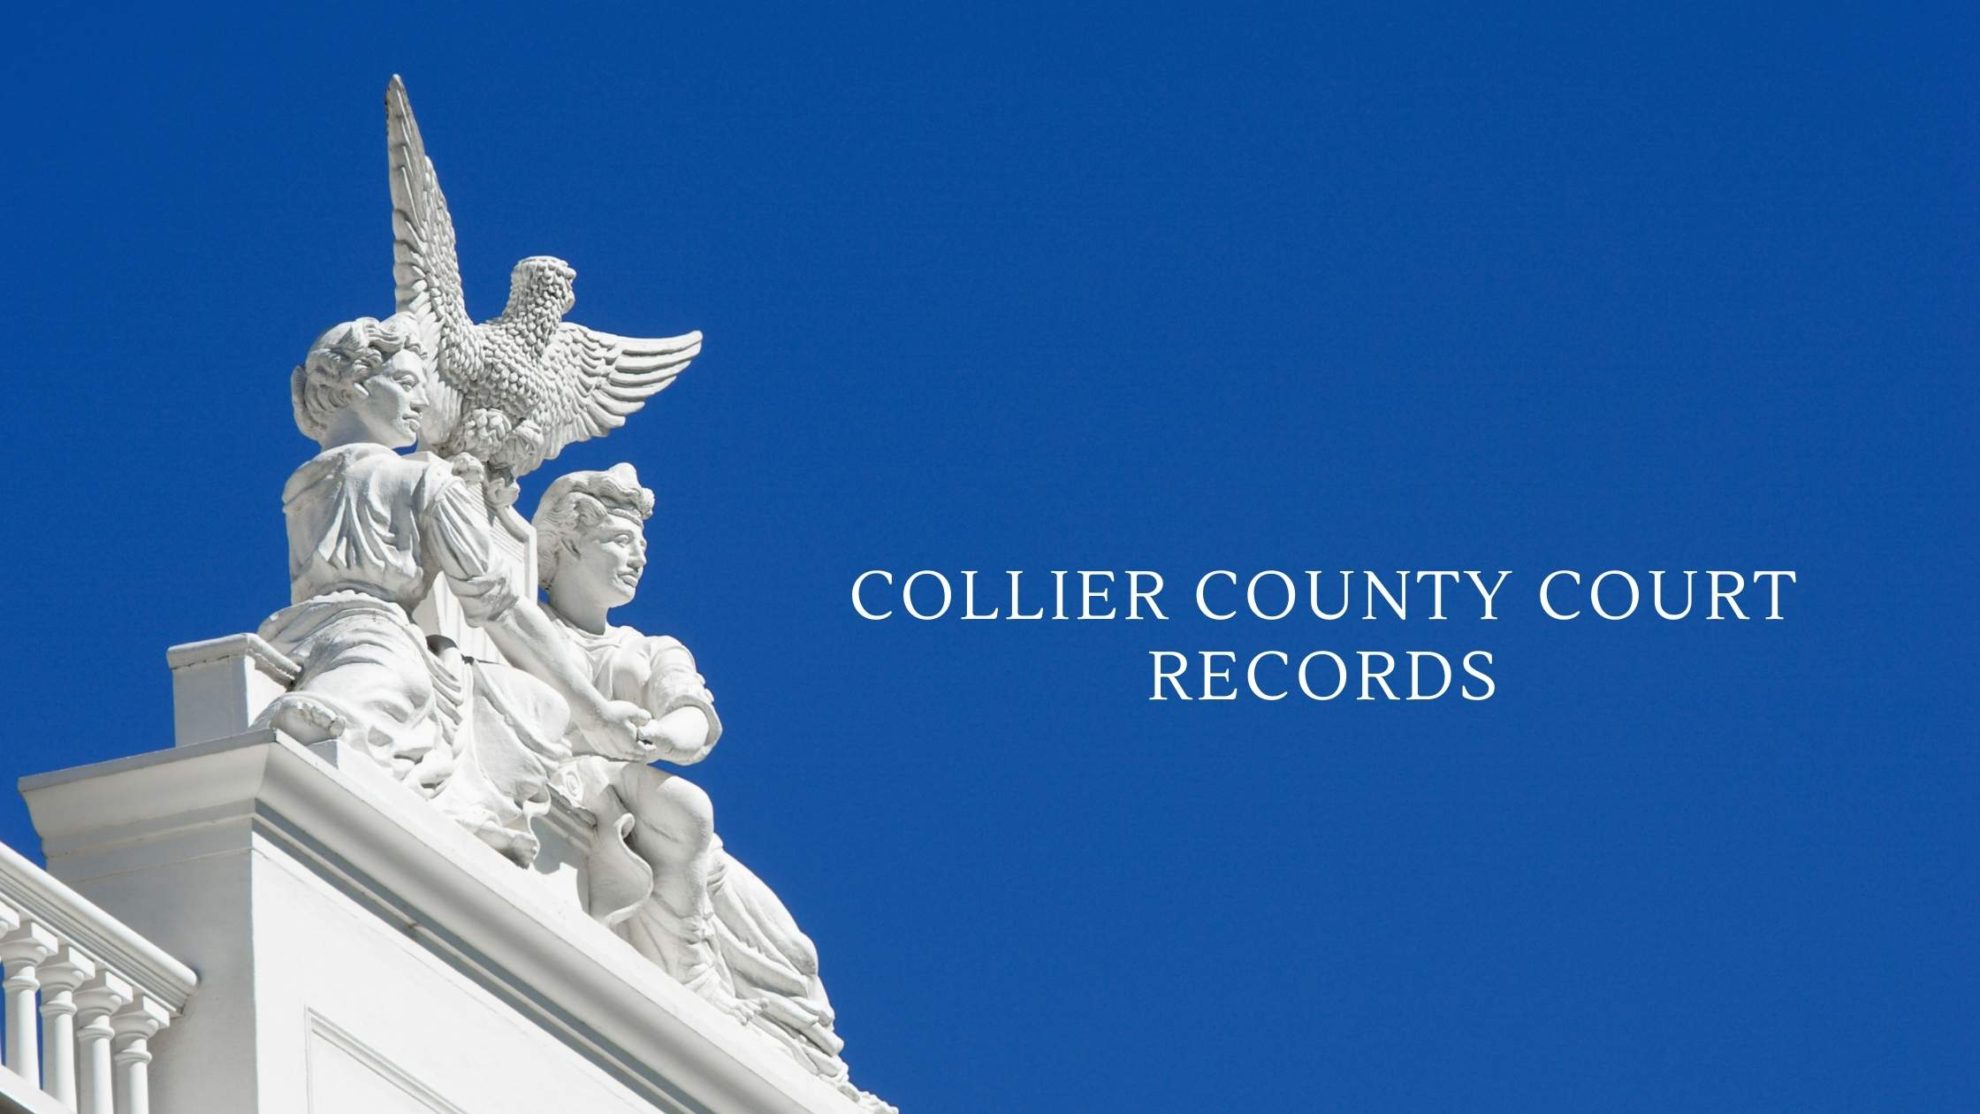 Collier County Court Records - Records Search - CCAP Wisconsin Court